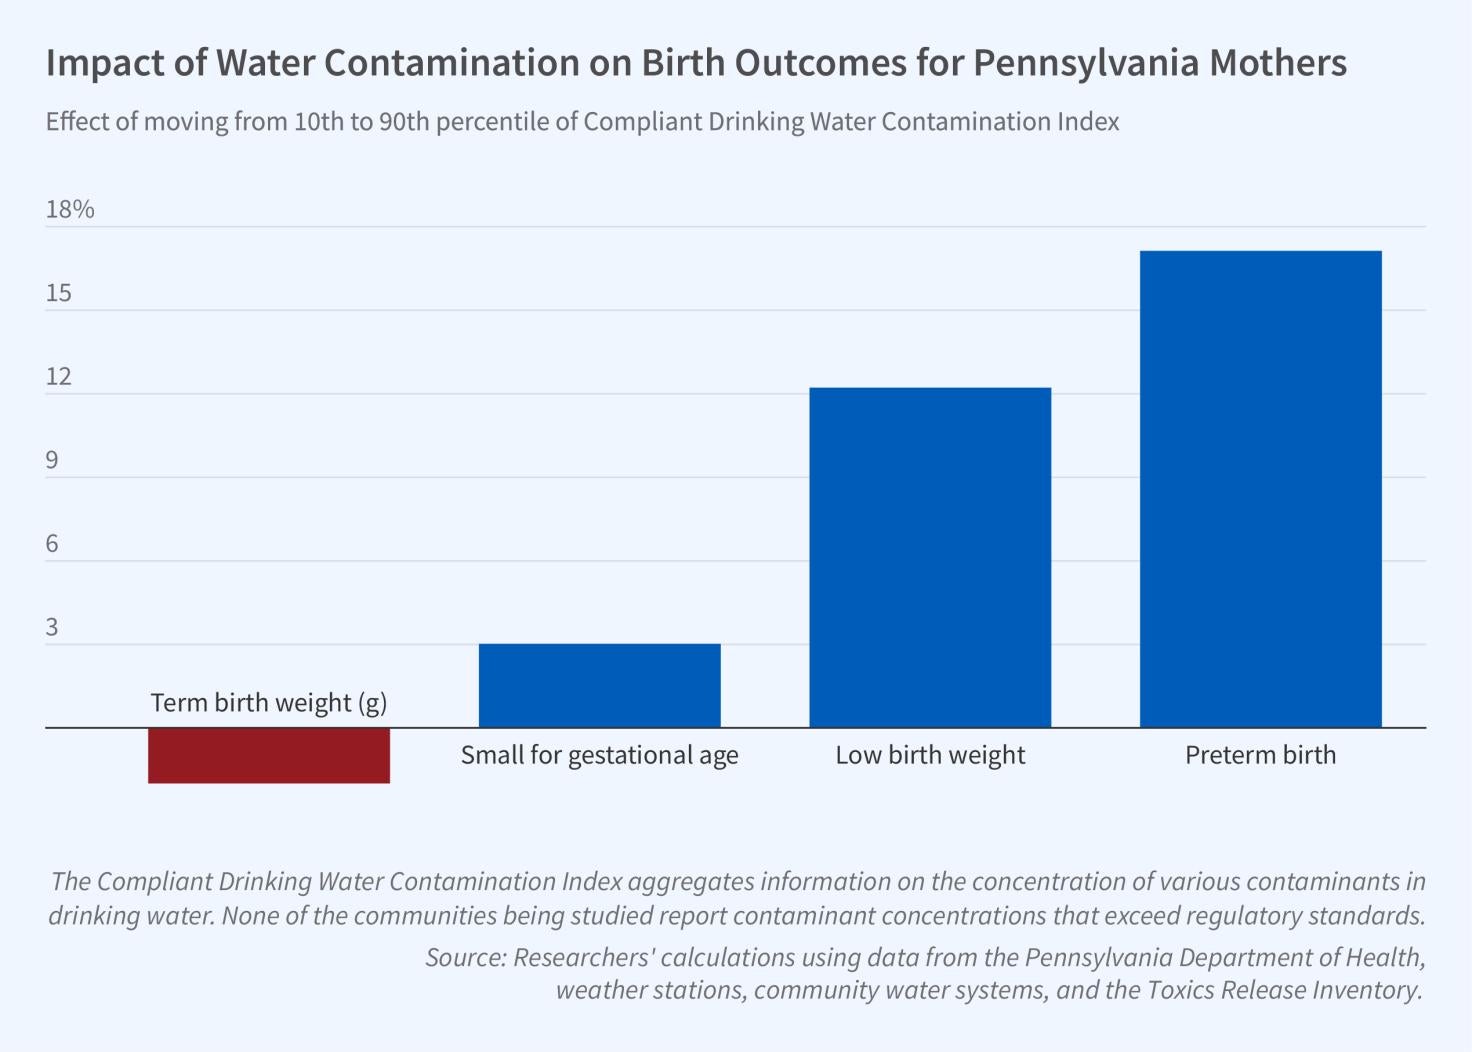  Drinking Water Contamination, Even at Low Levels, Affects Birth Outcomes